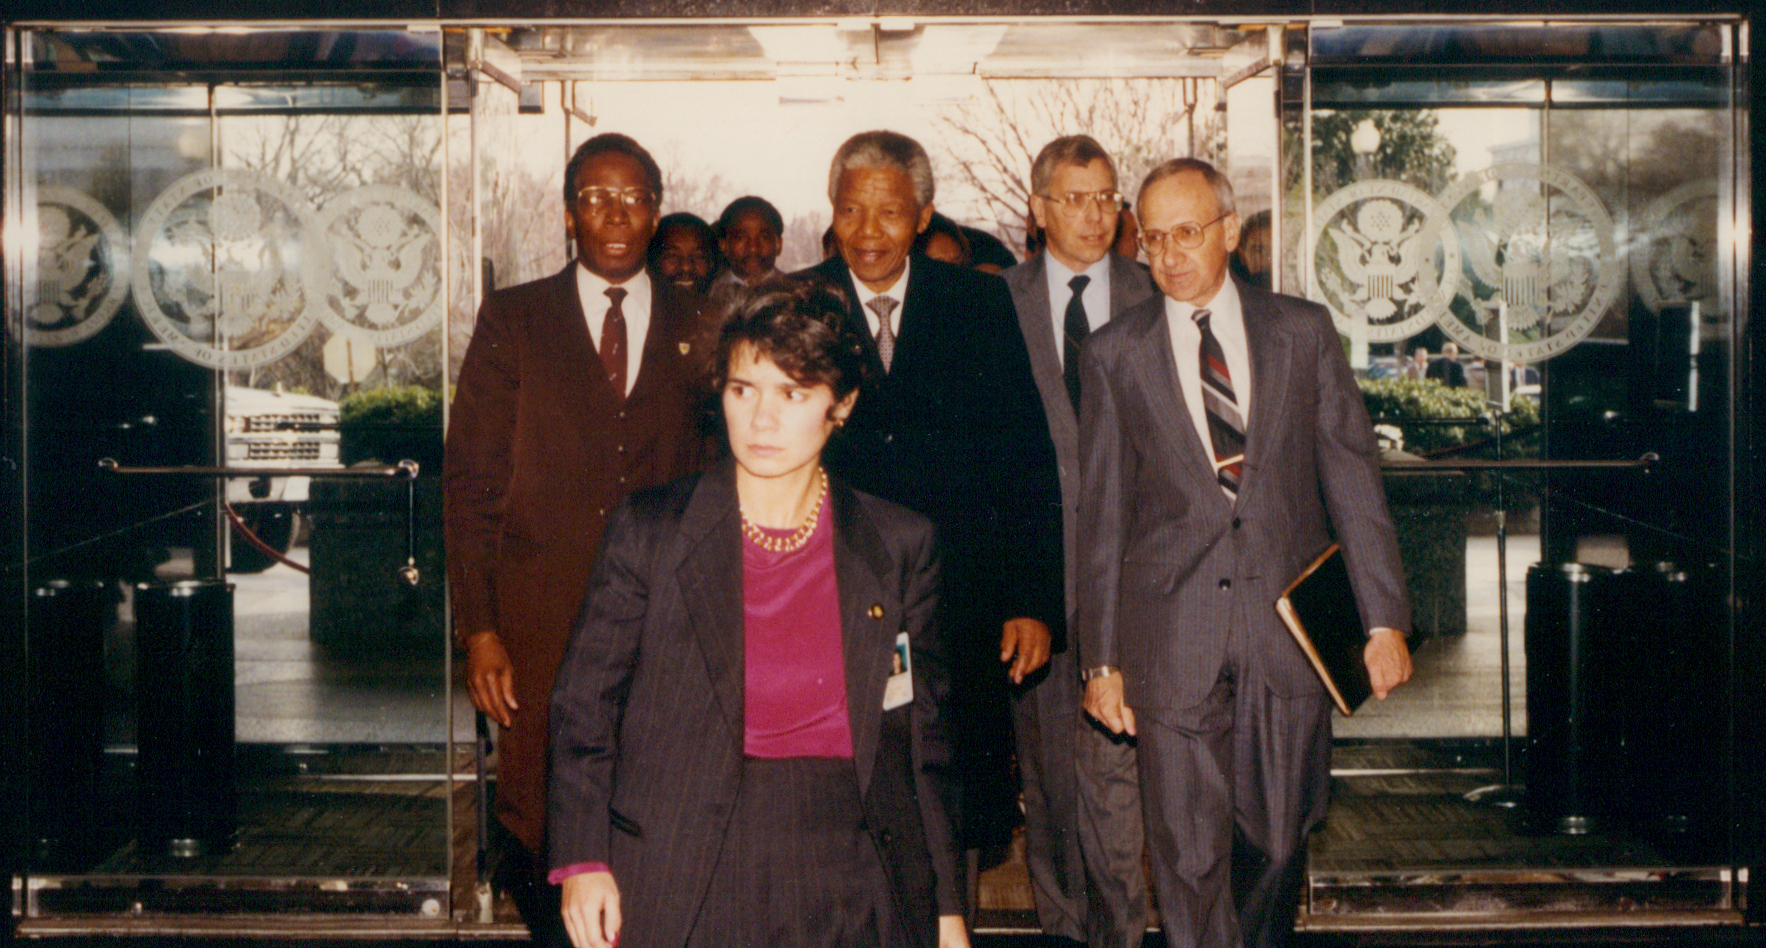  The late South African president Nelson Mandela, recently released after twenty-seven years in prison, enters the State Department with Cohen at the beginning of his first official visit to the United States in March 1990. 